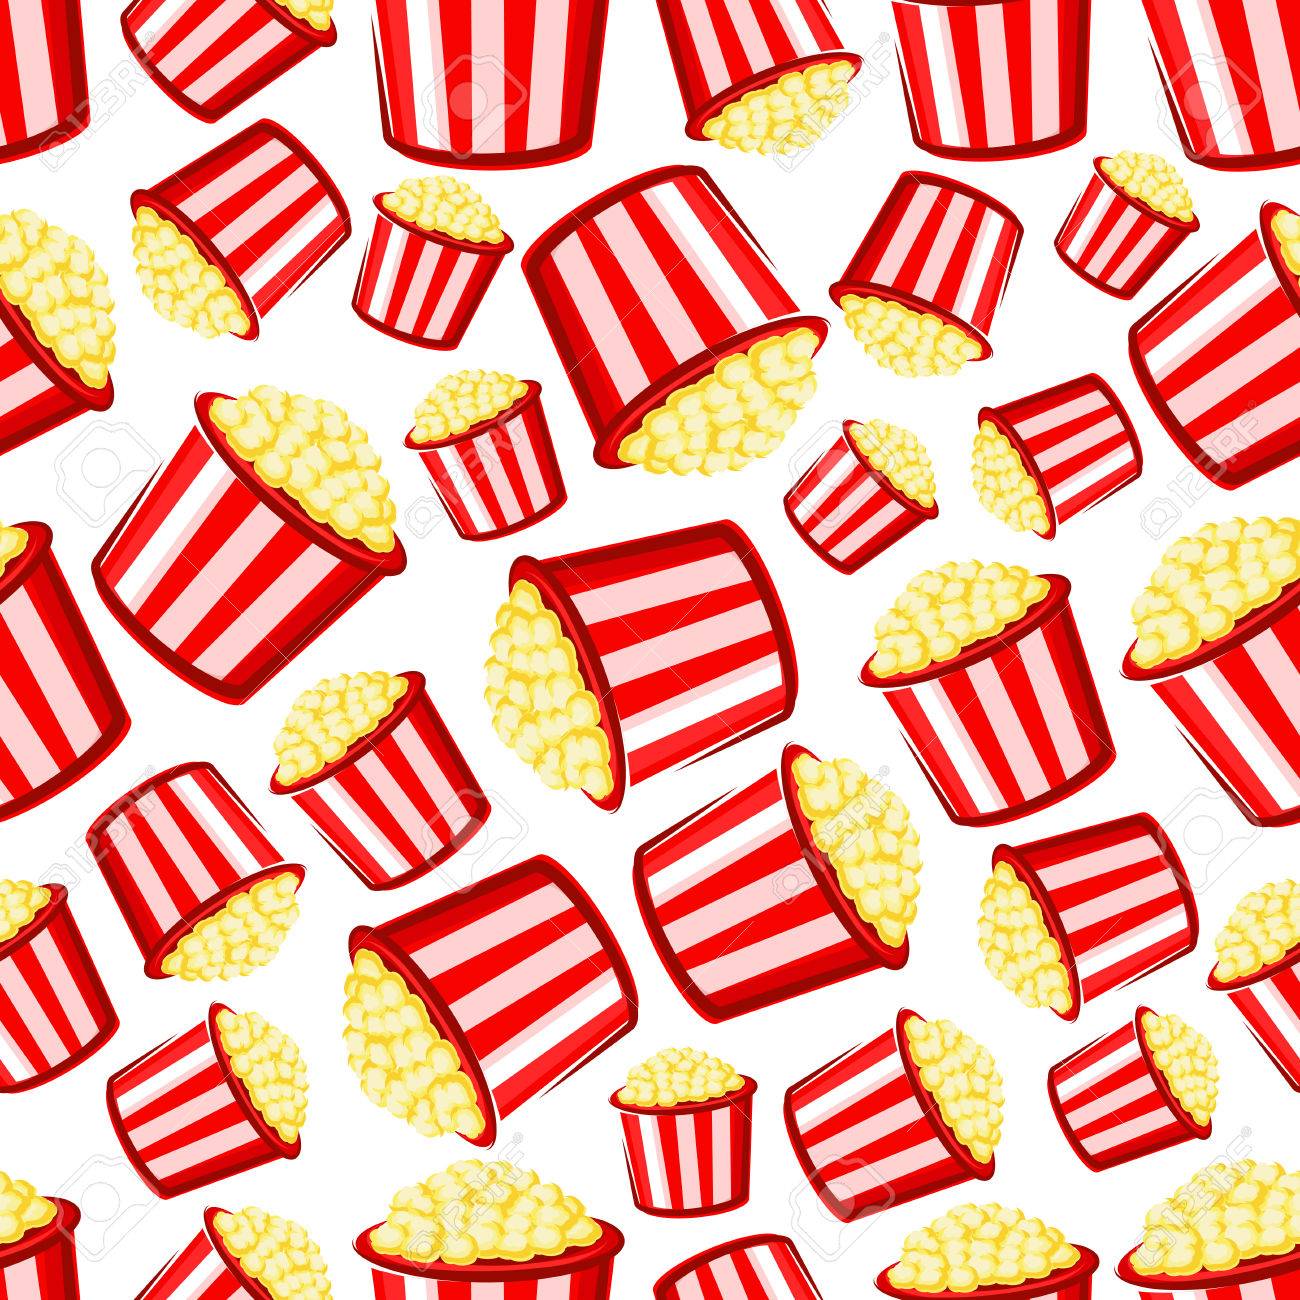 Takeaway Popcorn Background With Cartoon Seamless Pattern Of